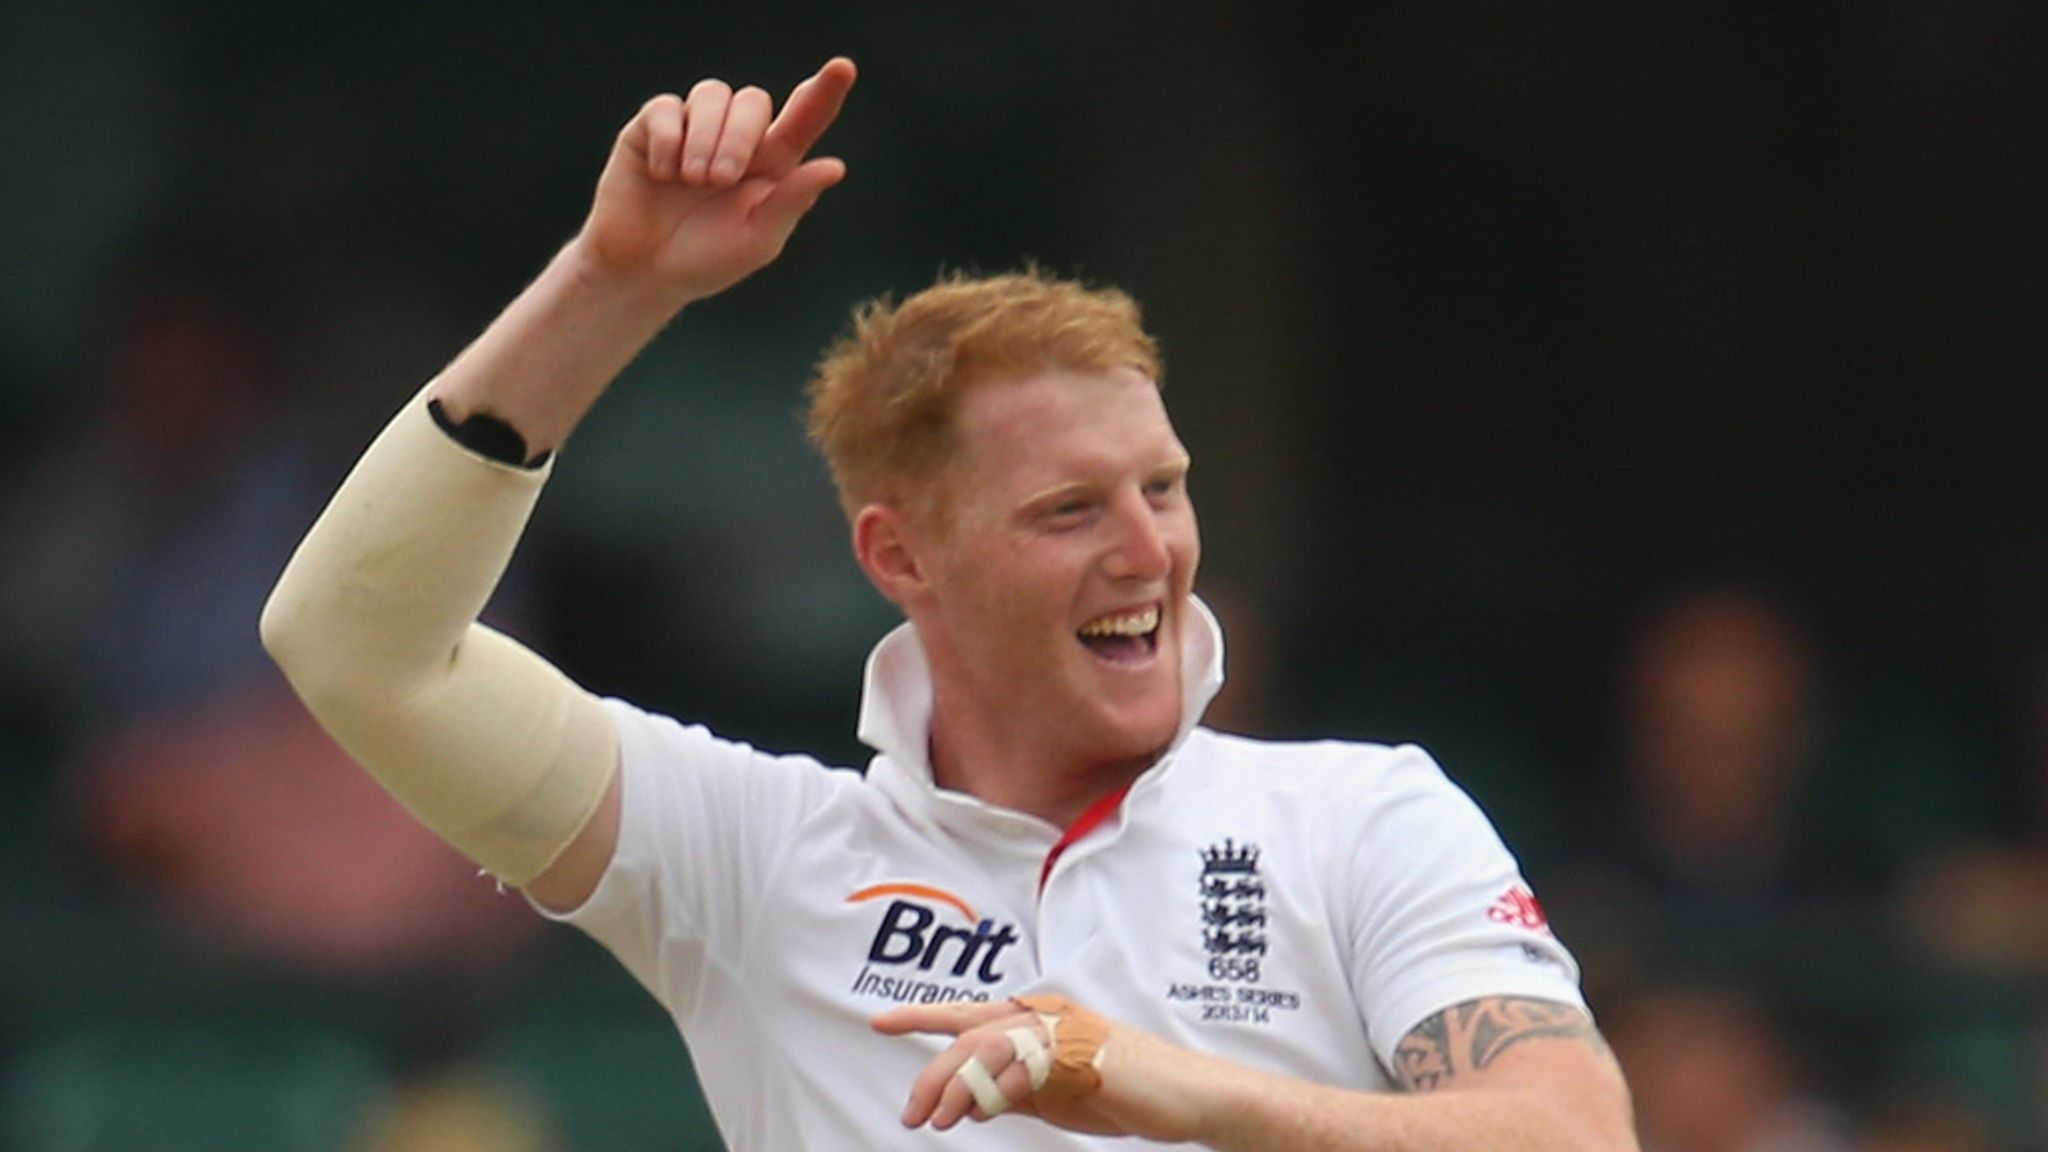 All Rounder Ben Stokes Recalled To England Squad For First Test Against